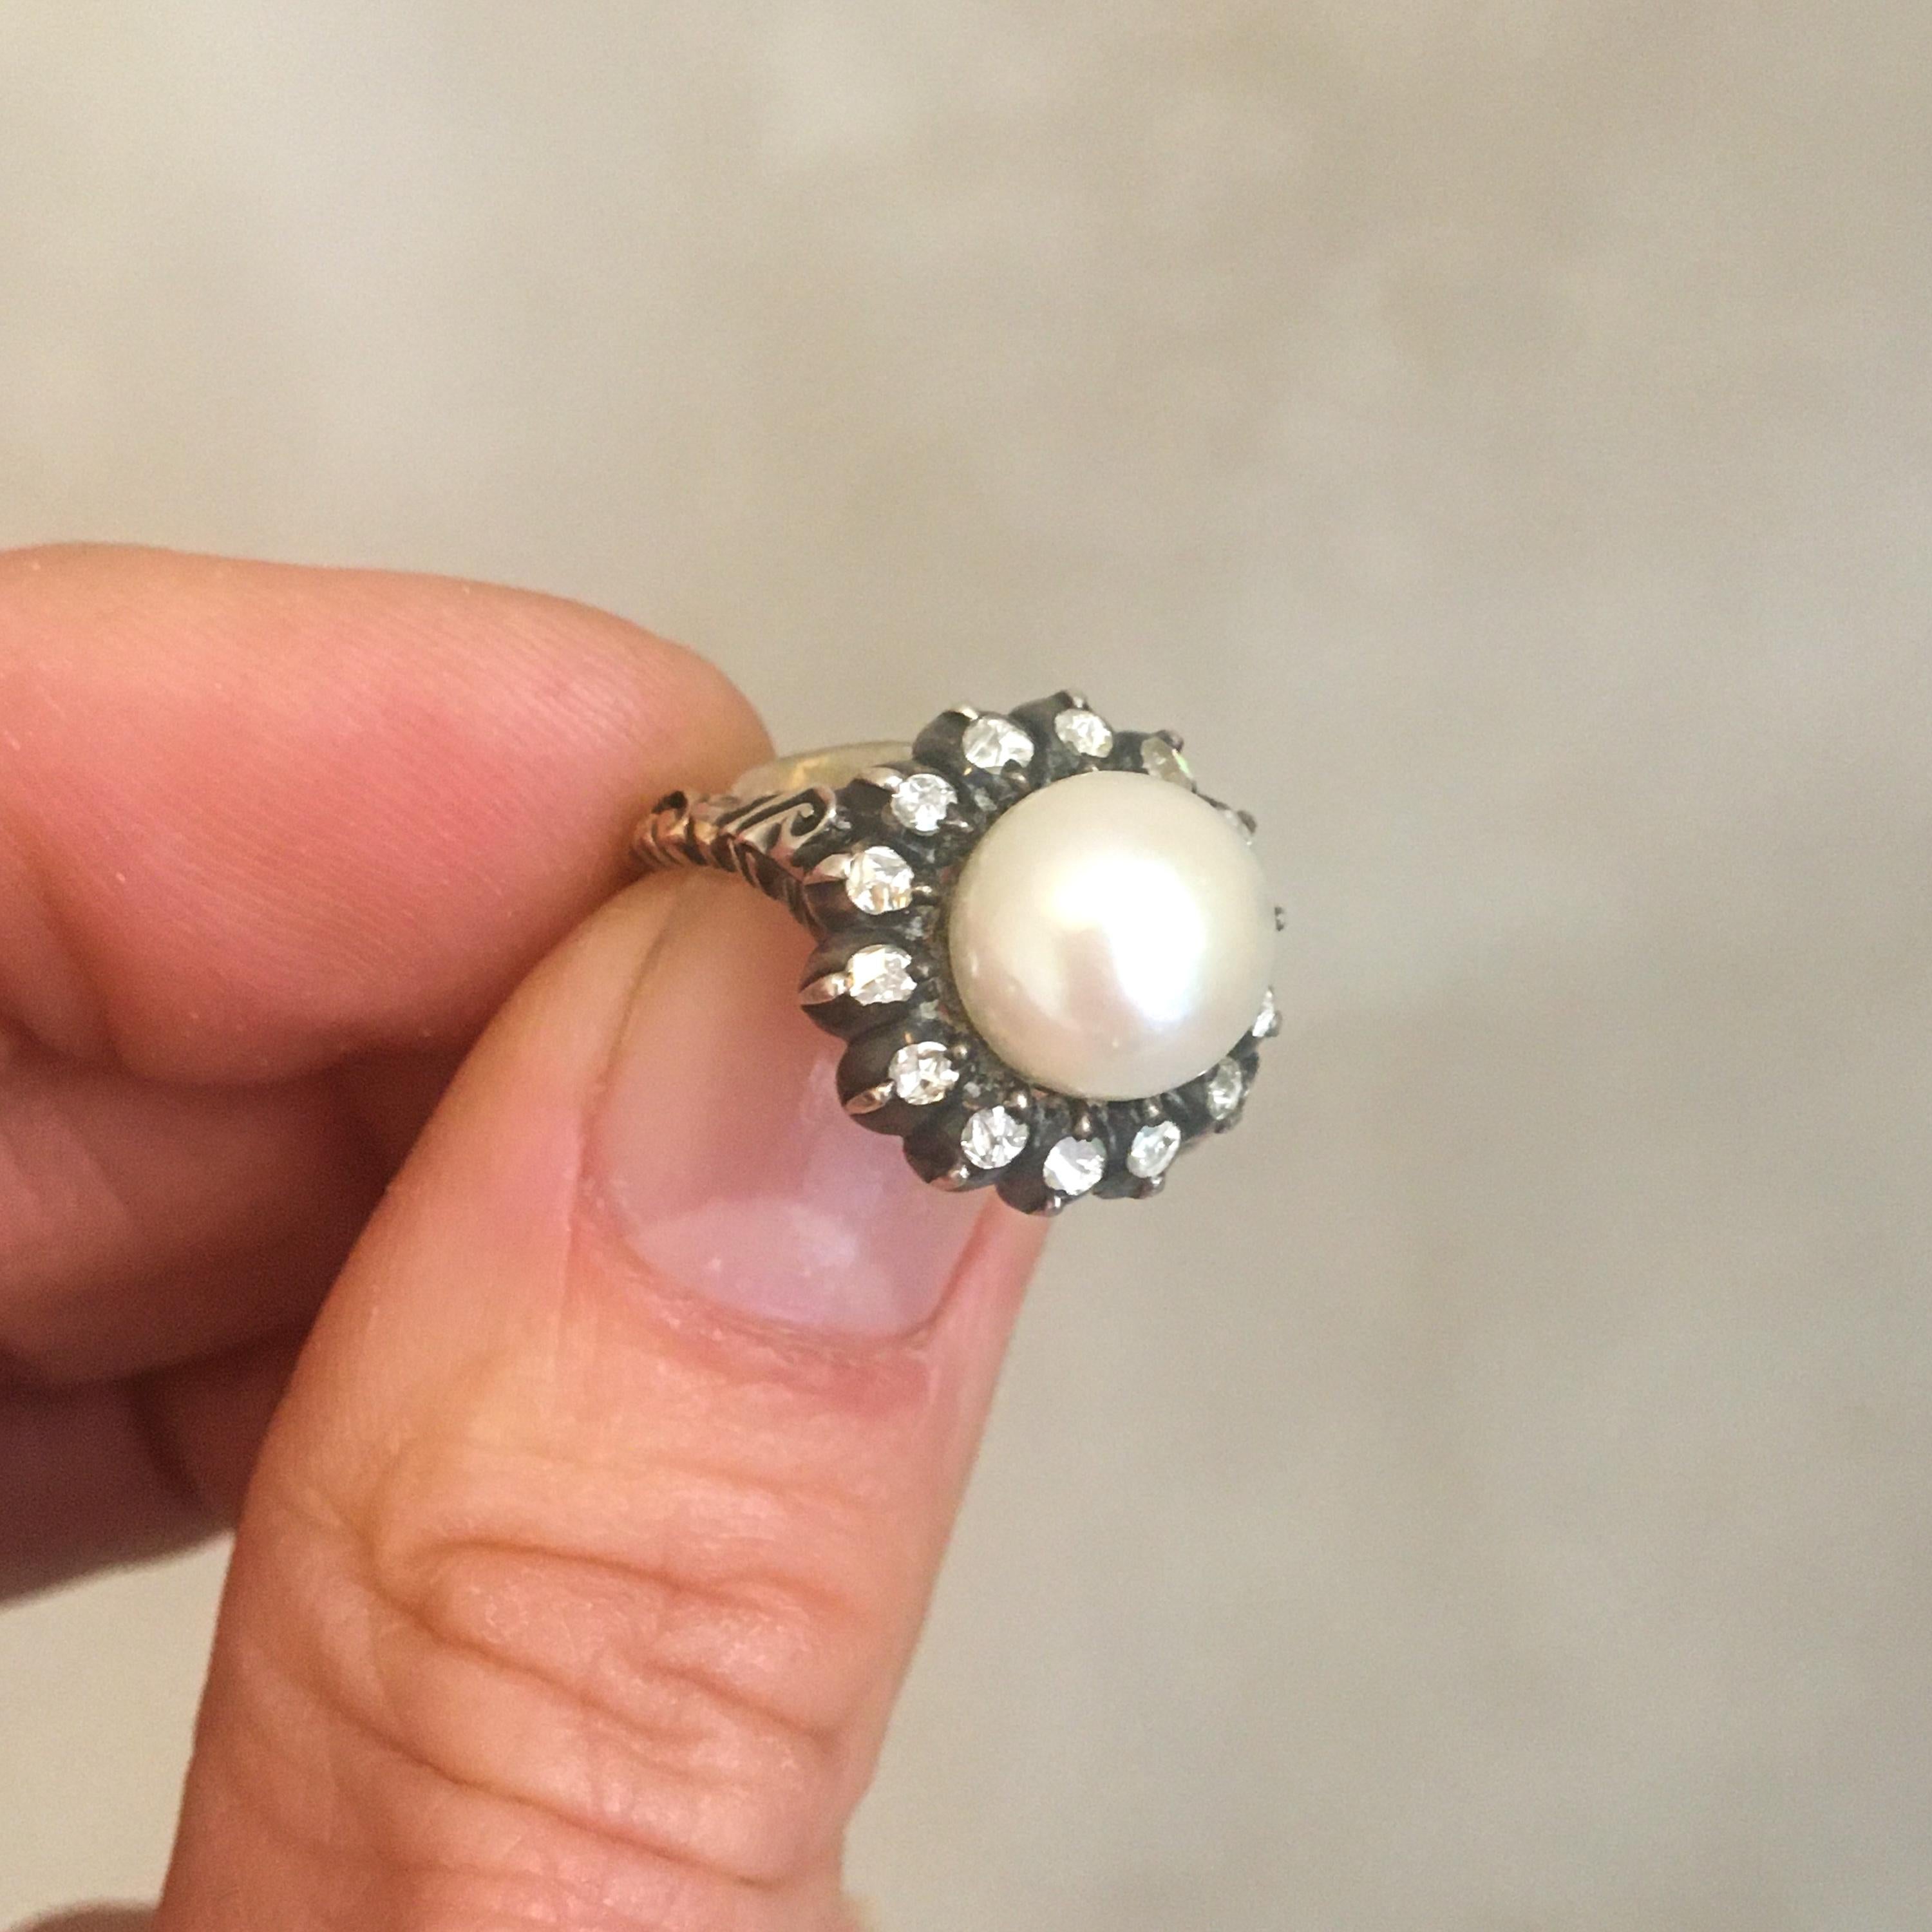 This gorgeous early 20th century pearl and diamond jewelry set consisting of two round stud earrings and a ring. The ring and earrings are each set with fourteen rose cut diamonds and surrounding a beautiful round cultured pearl. The band of the